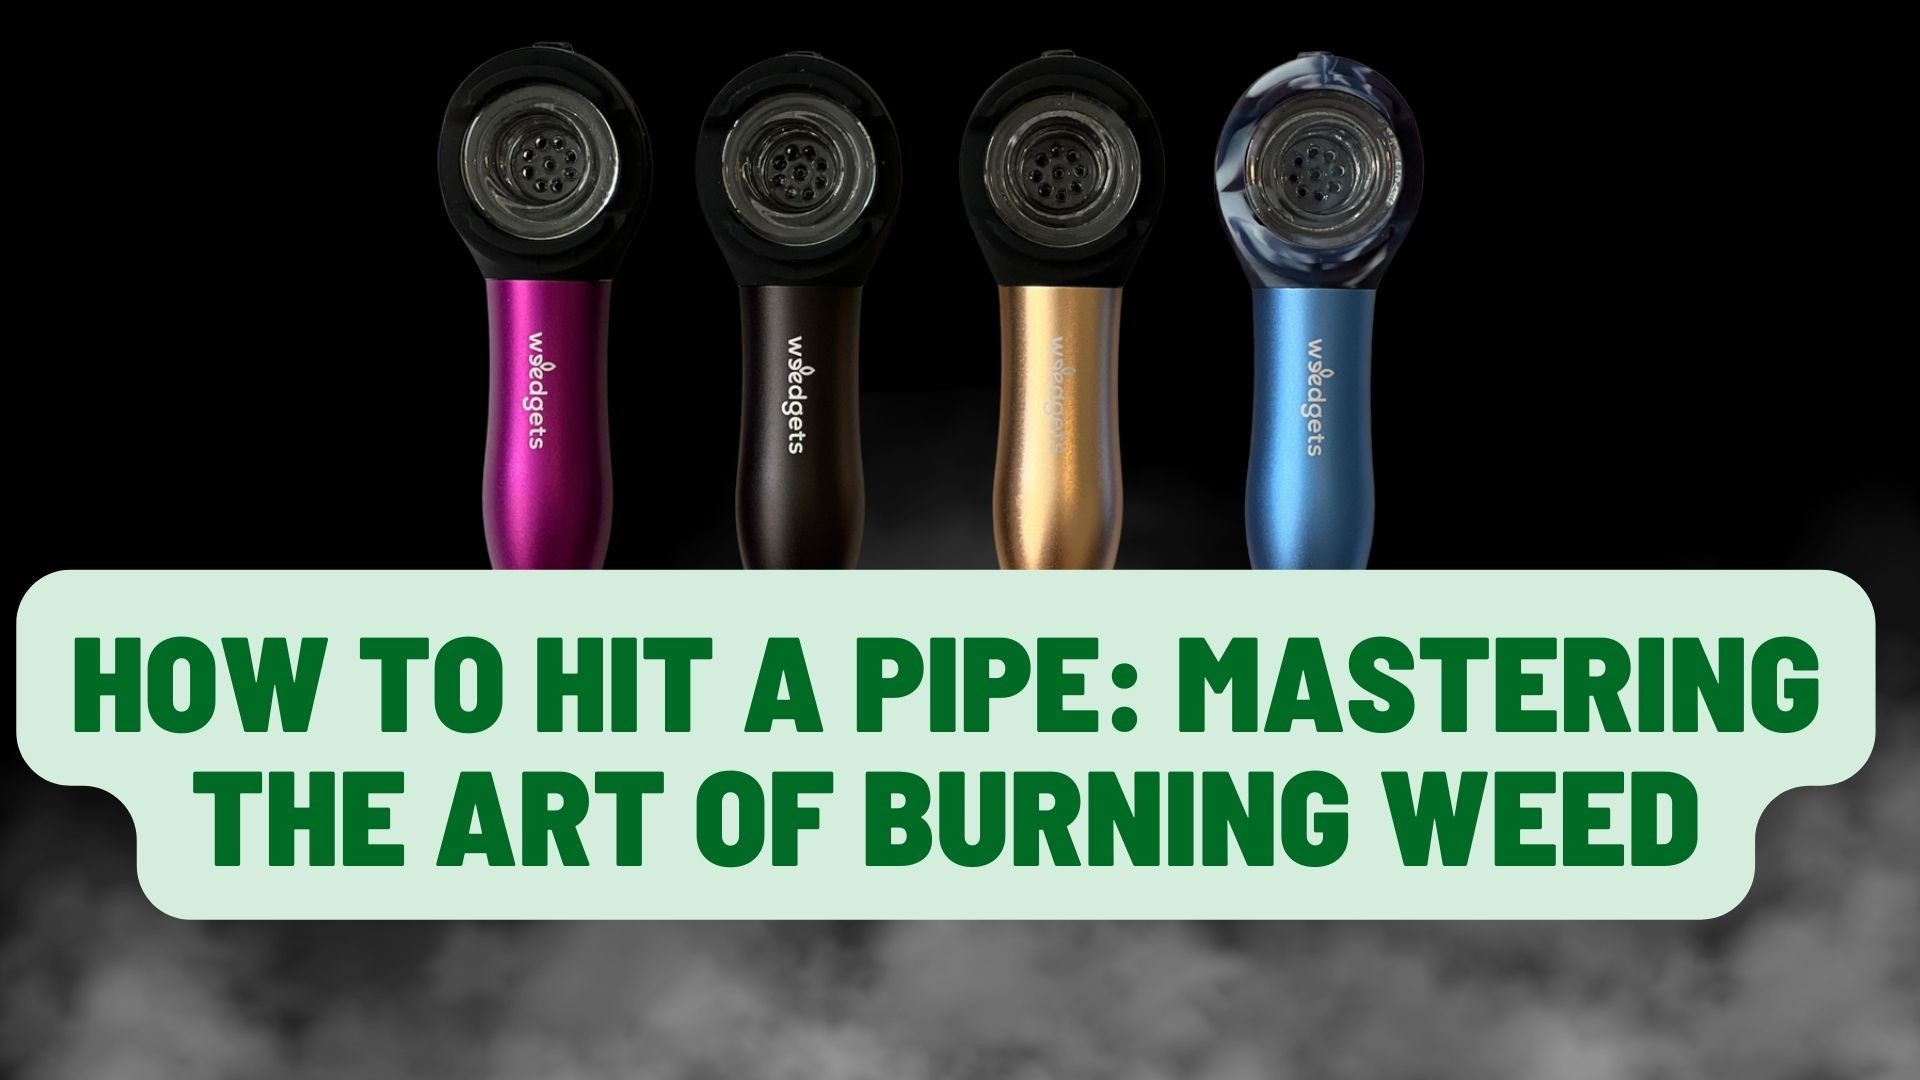 How To Hit a Pipe: Mastering the Art of Burning Weed